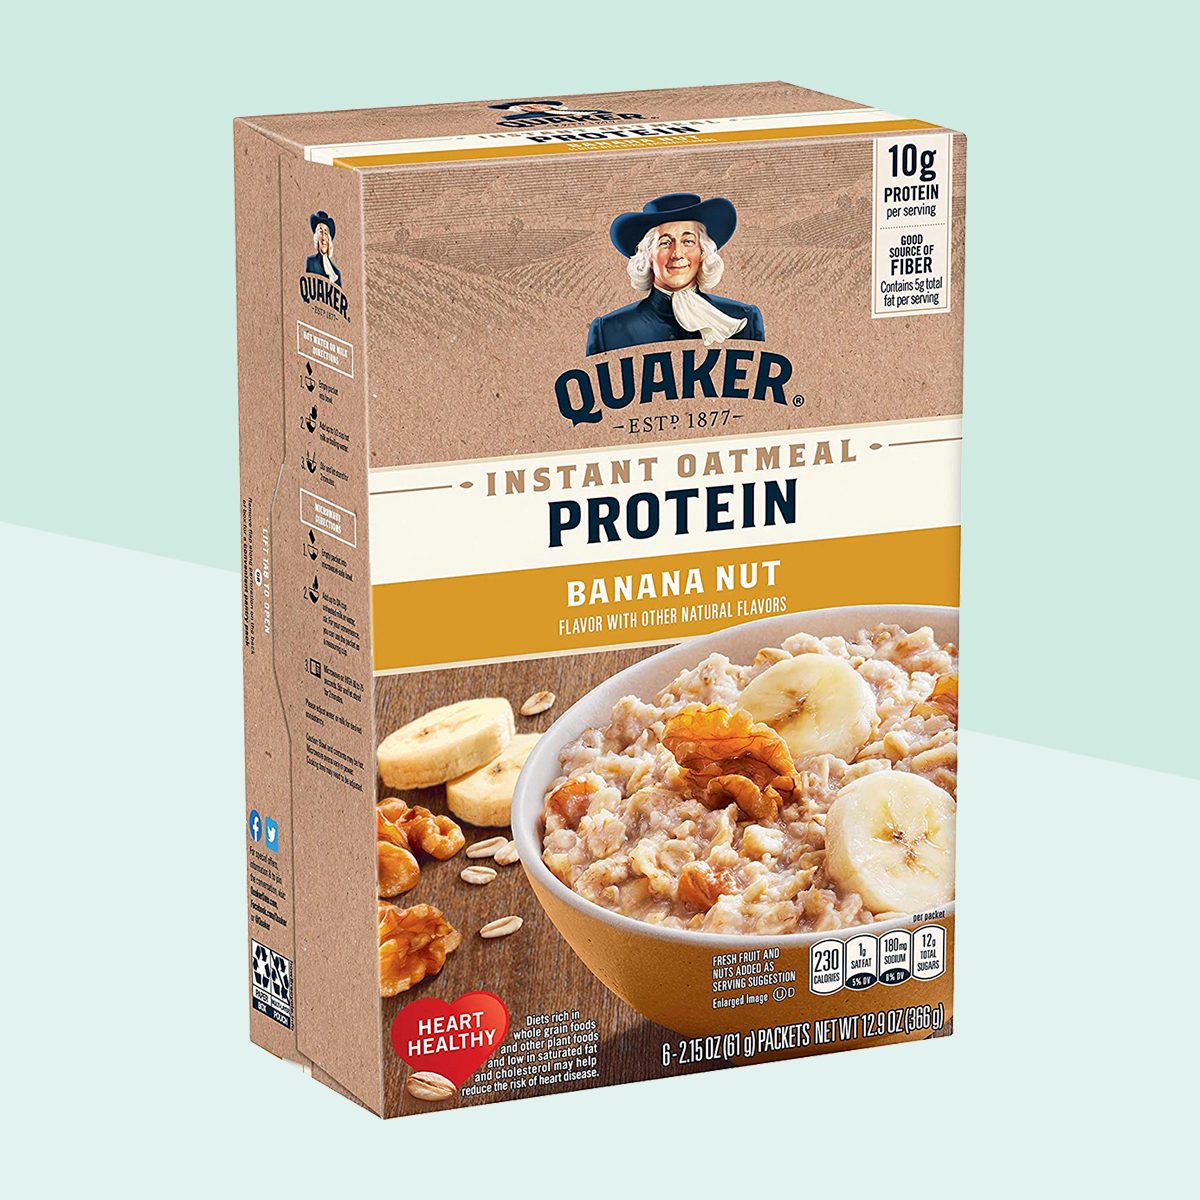 Quaker Protein Instant Oatmeal, Banana Nut, 10g Protein, Individual Packets, 36 Count